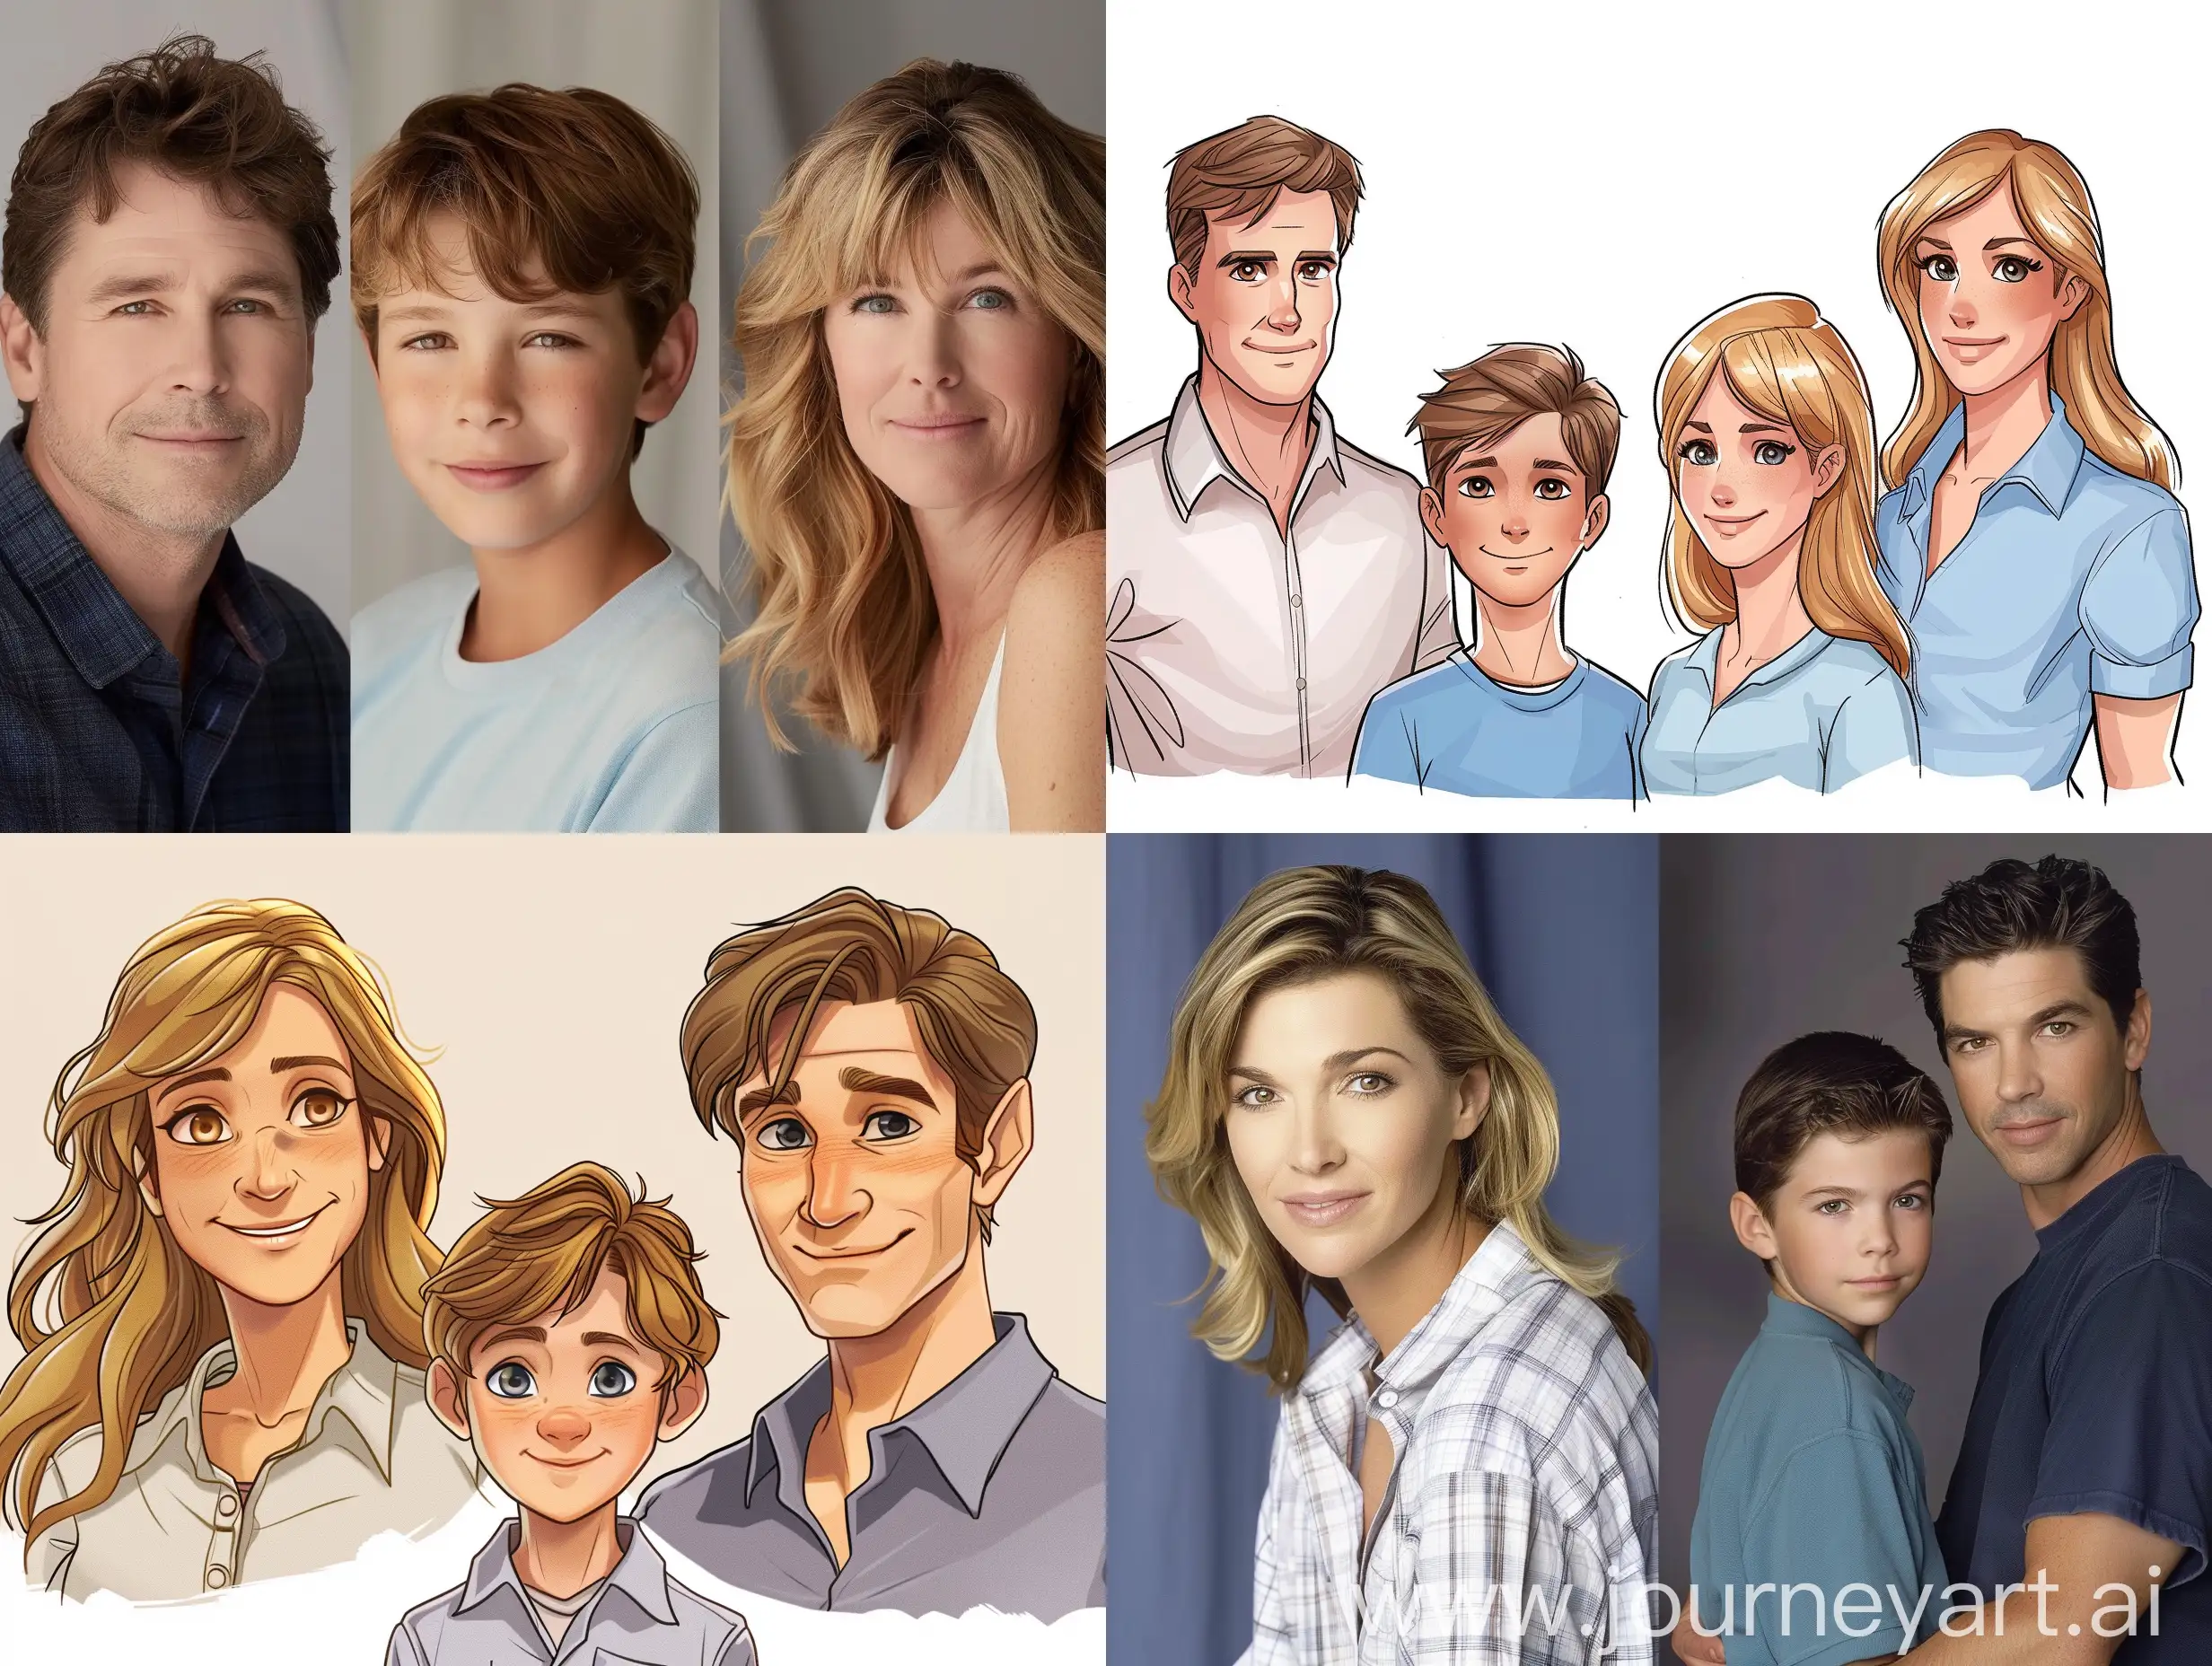 David is the father of Kevin  and husband of Emily. 35 years old. brown hair and pretty.  Emily is the mother of Kevin  and wife of David. 30 years  old. beautiful and blond hair. Kevin is son of David  and Emily. 10 years old. brown hair.